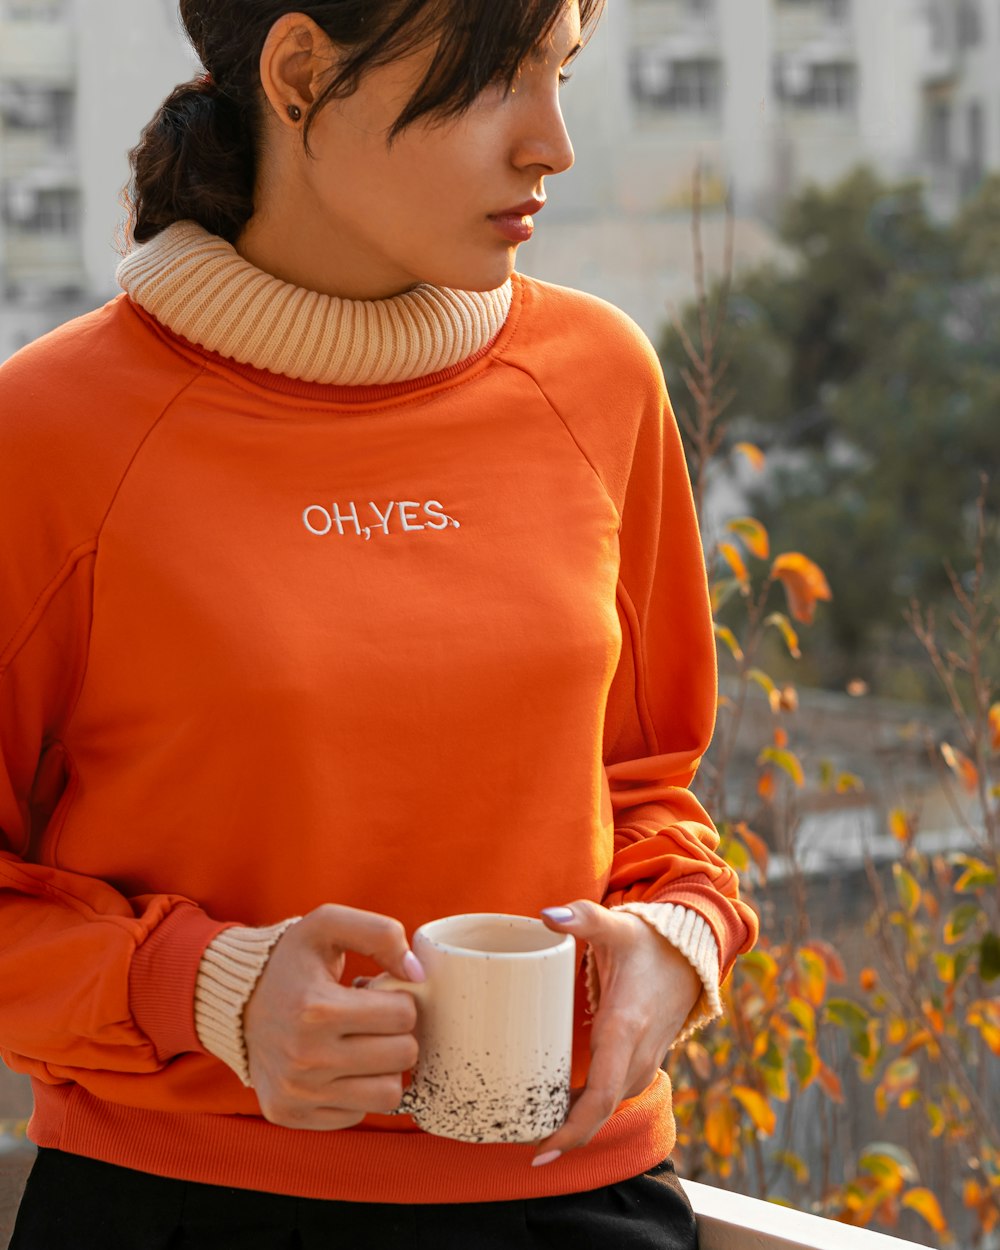 a woman in an orange sweater holding a coffee cup